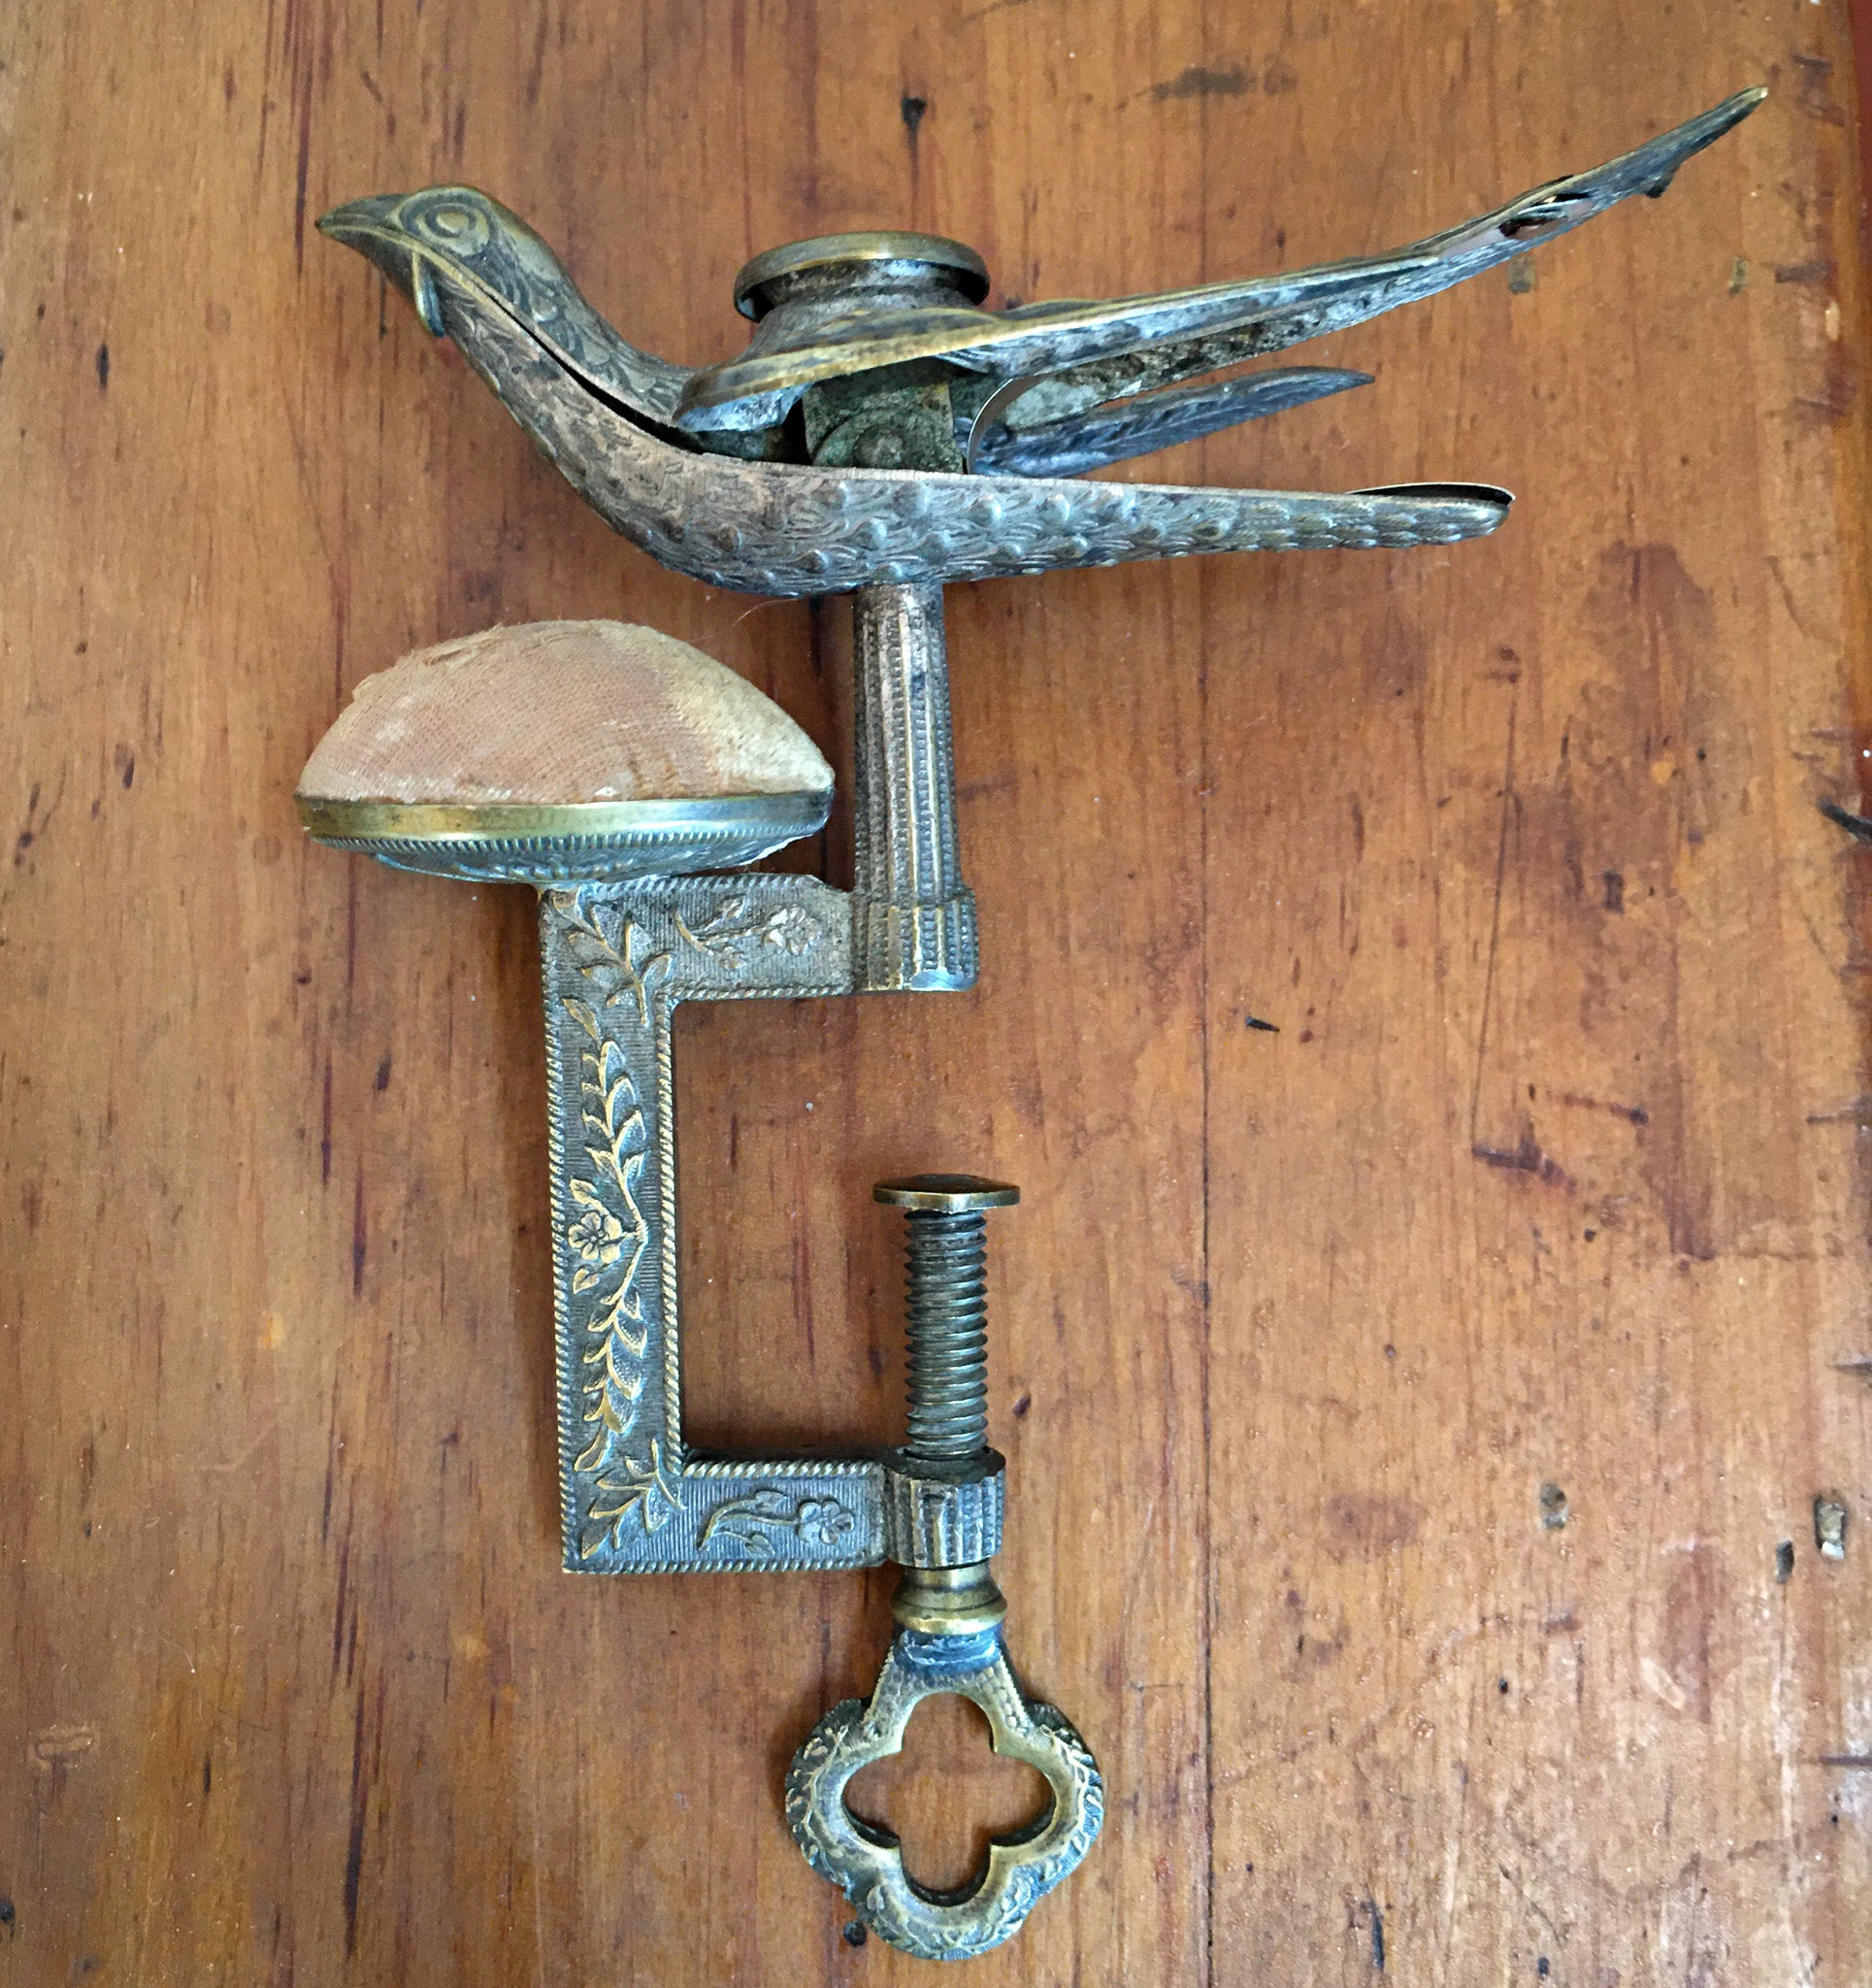 Victorian Sewing Bird, Patented Feb 15, 1853 With Original Pin Cushion